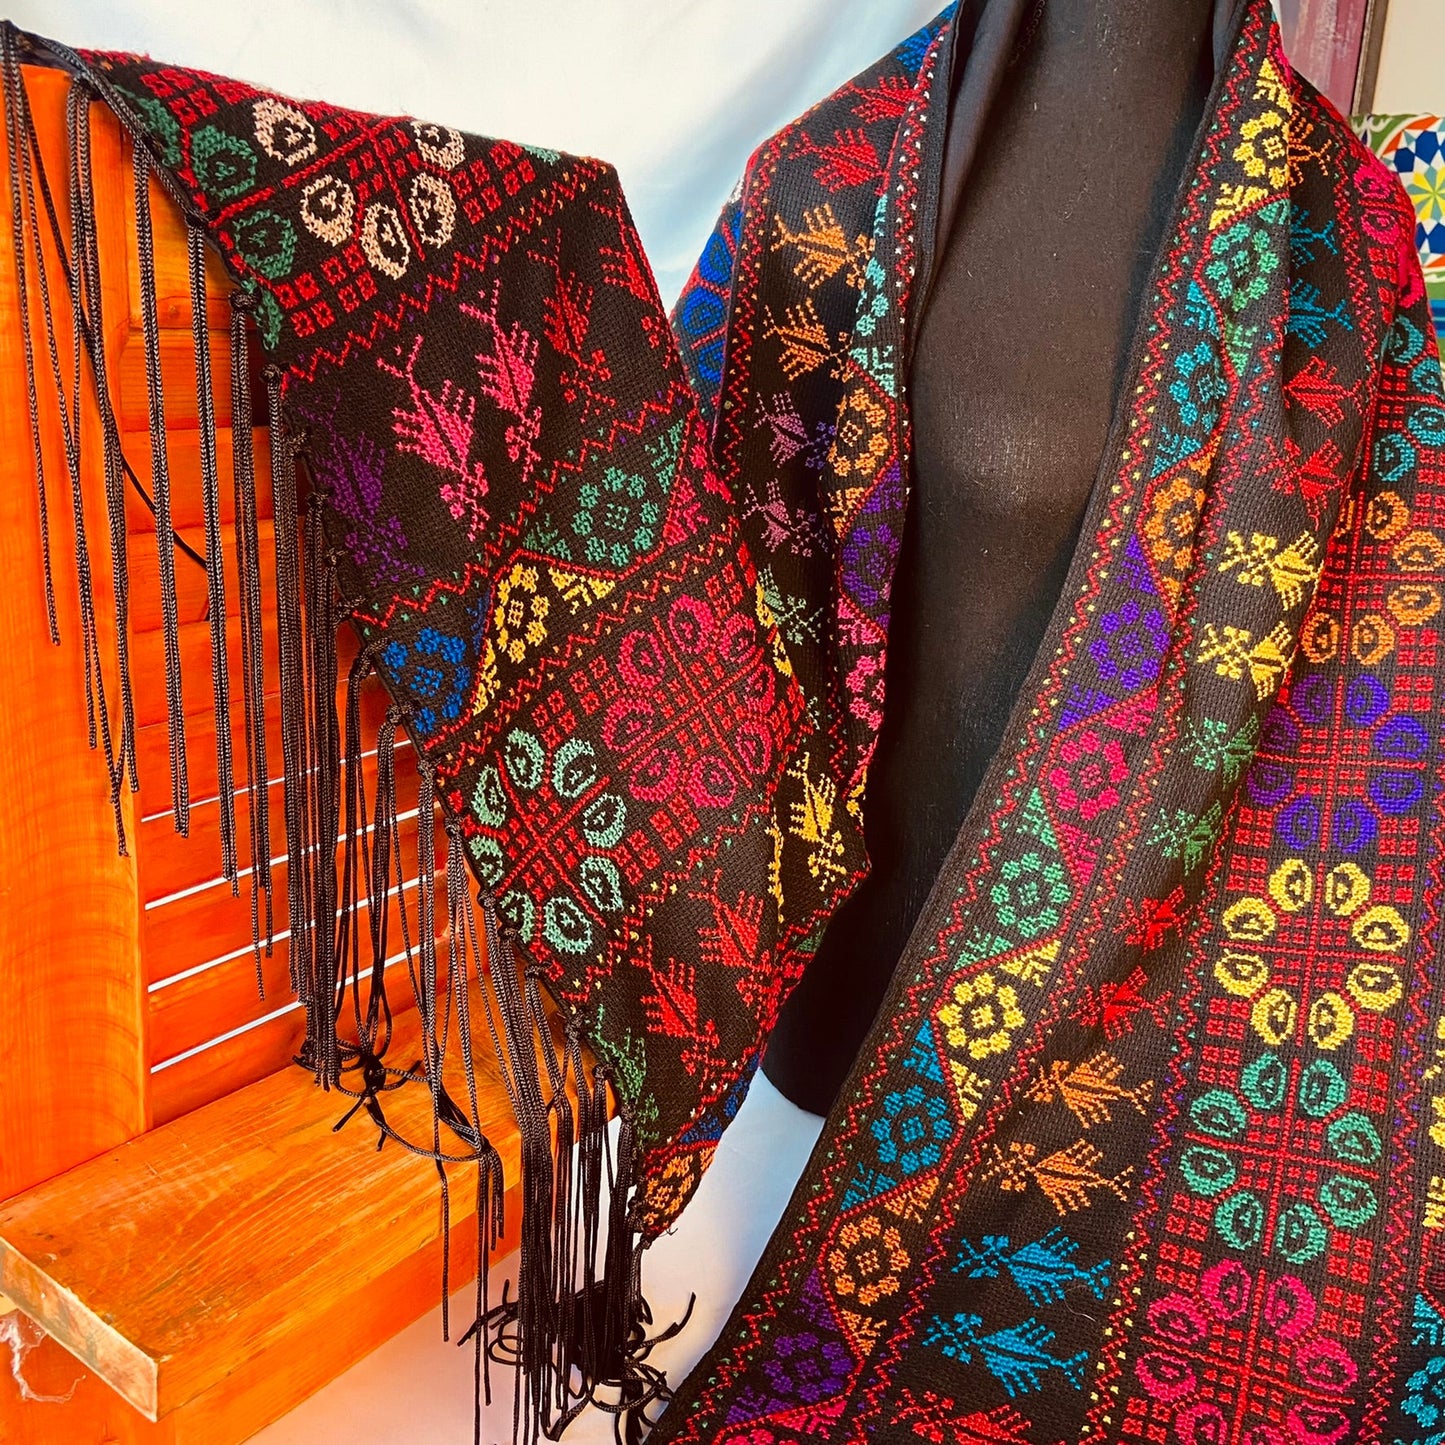 Threads of Sinai: Bedouin Tribe's Hand-Stitched Scarves in the Egyptian Desert